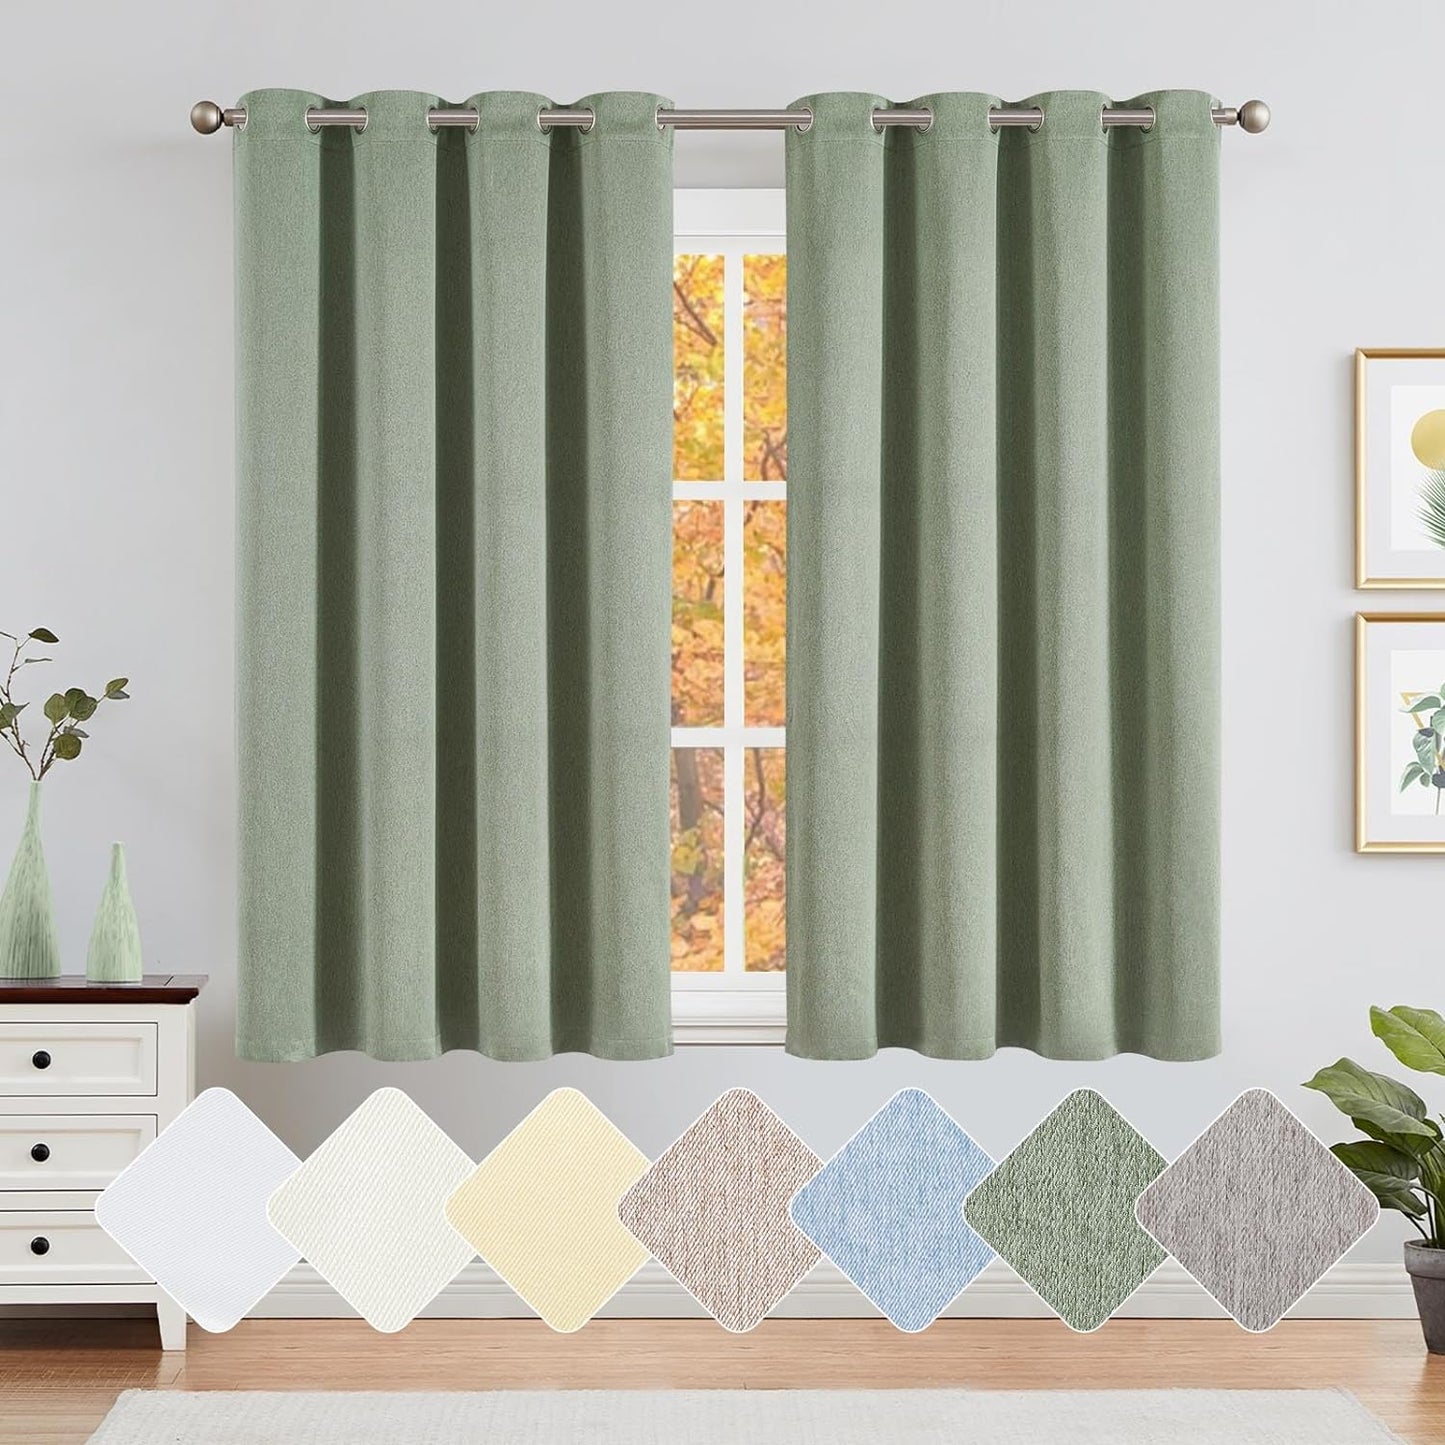 Jinchan Curtains for Bedroom Living Room 84 Inch Long Room Darkening Farmhouse Country Window Curtains Heathered Denim Blue Curtains Grommet Curtains Drapes 2 Panels  CKNY HOME FASHION *Sage Green 50"W X 63"L 